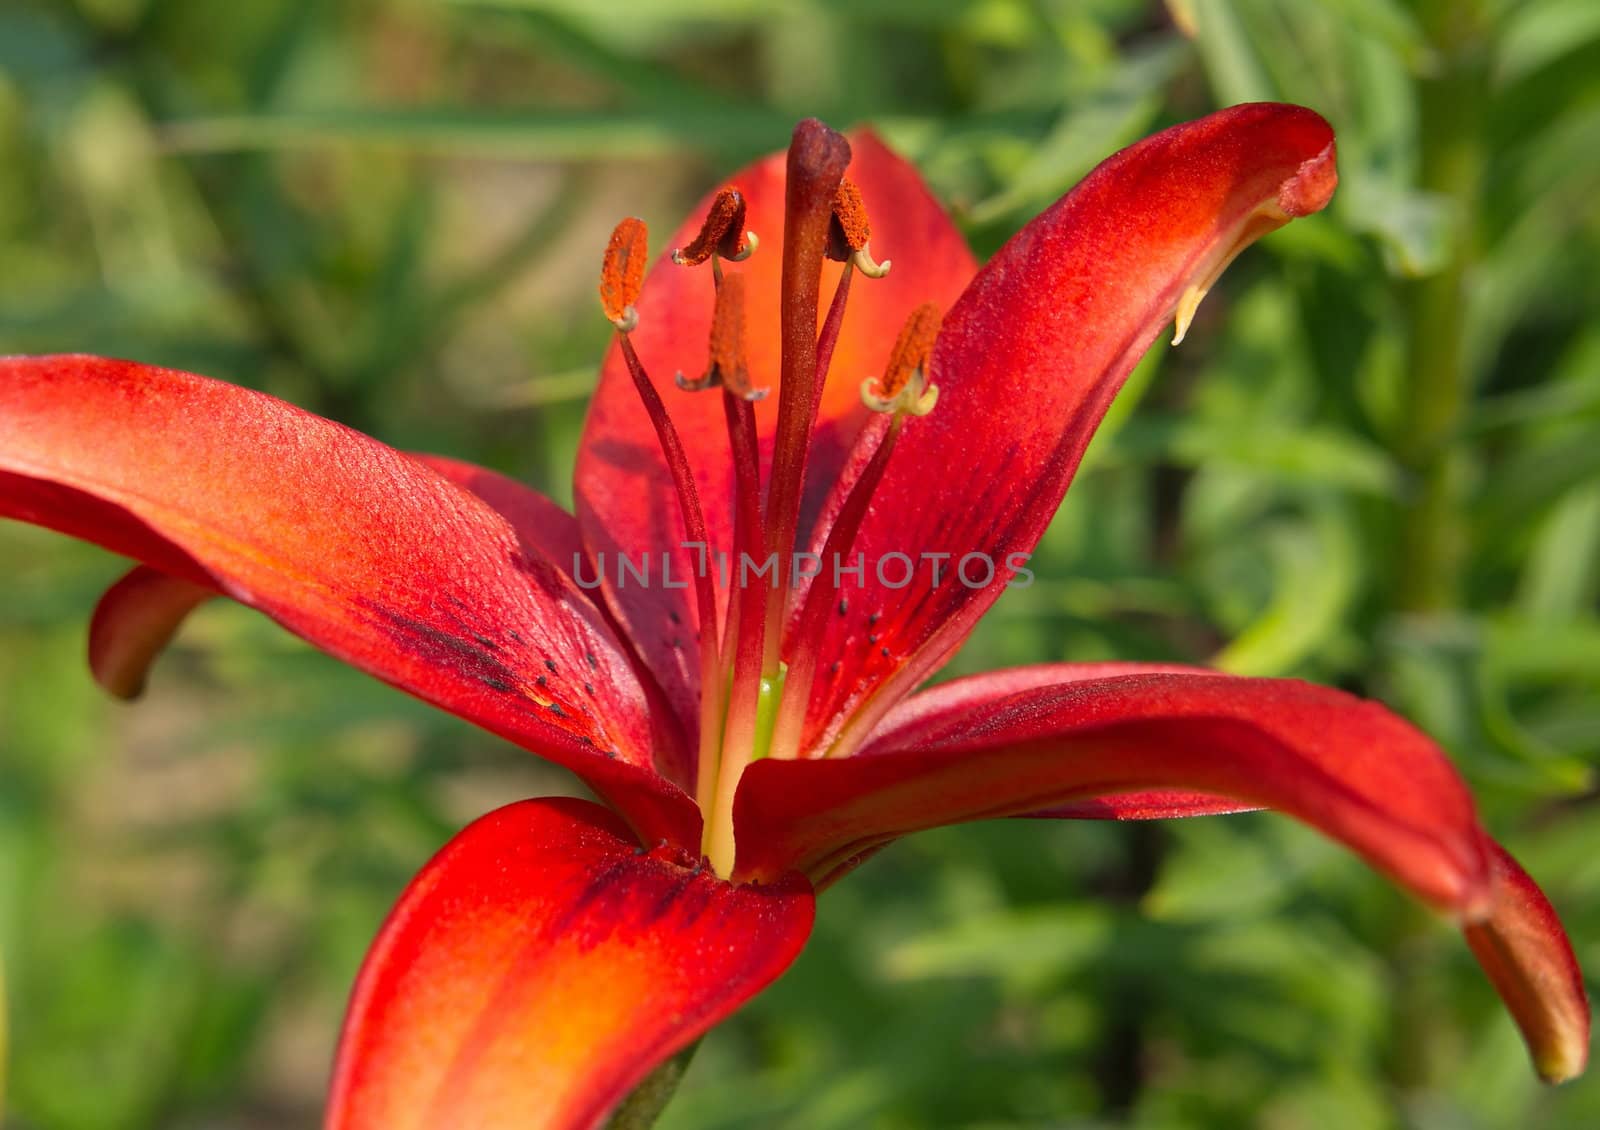 Red beautiful garden lily  in natural light of close-up.